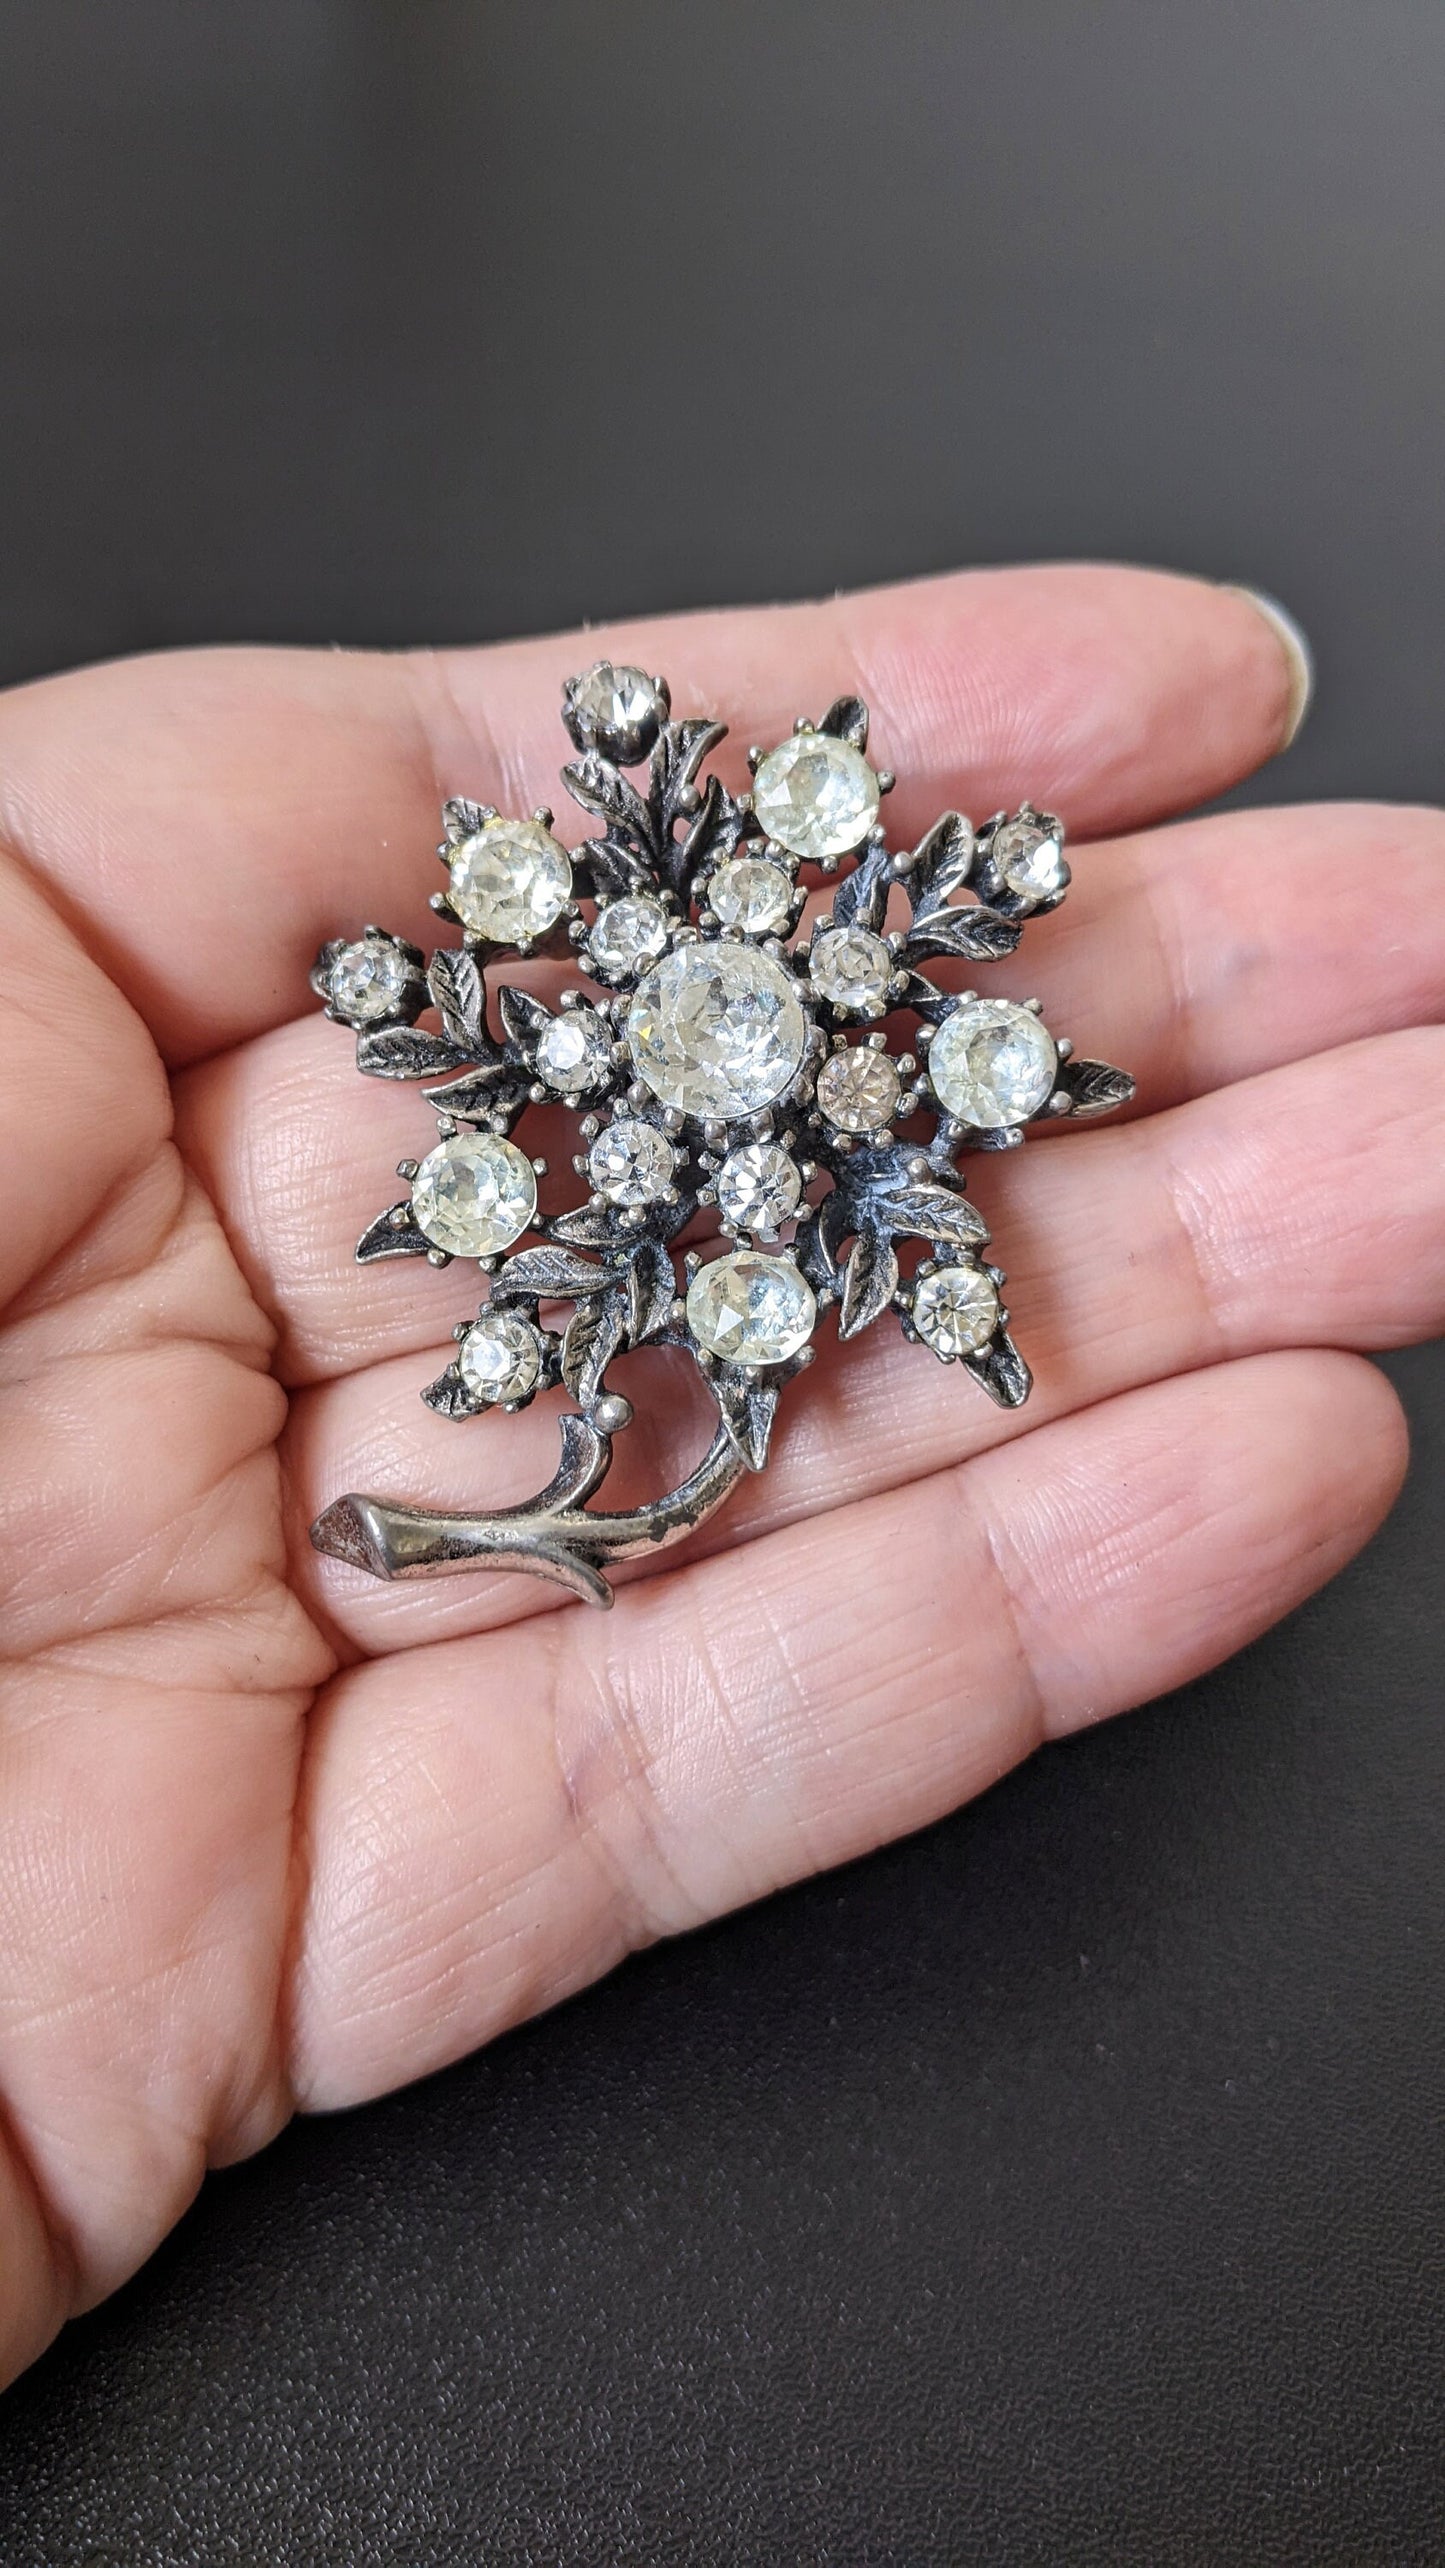 50s Sparkly Rhinestone Flower Brooch by Coro Jewelcraft, Floral Crystal Pin